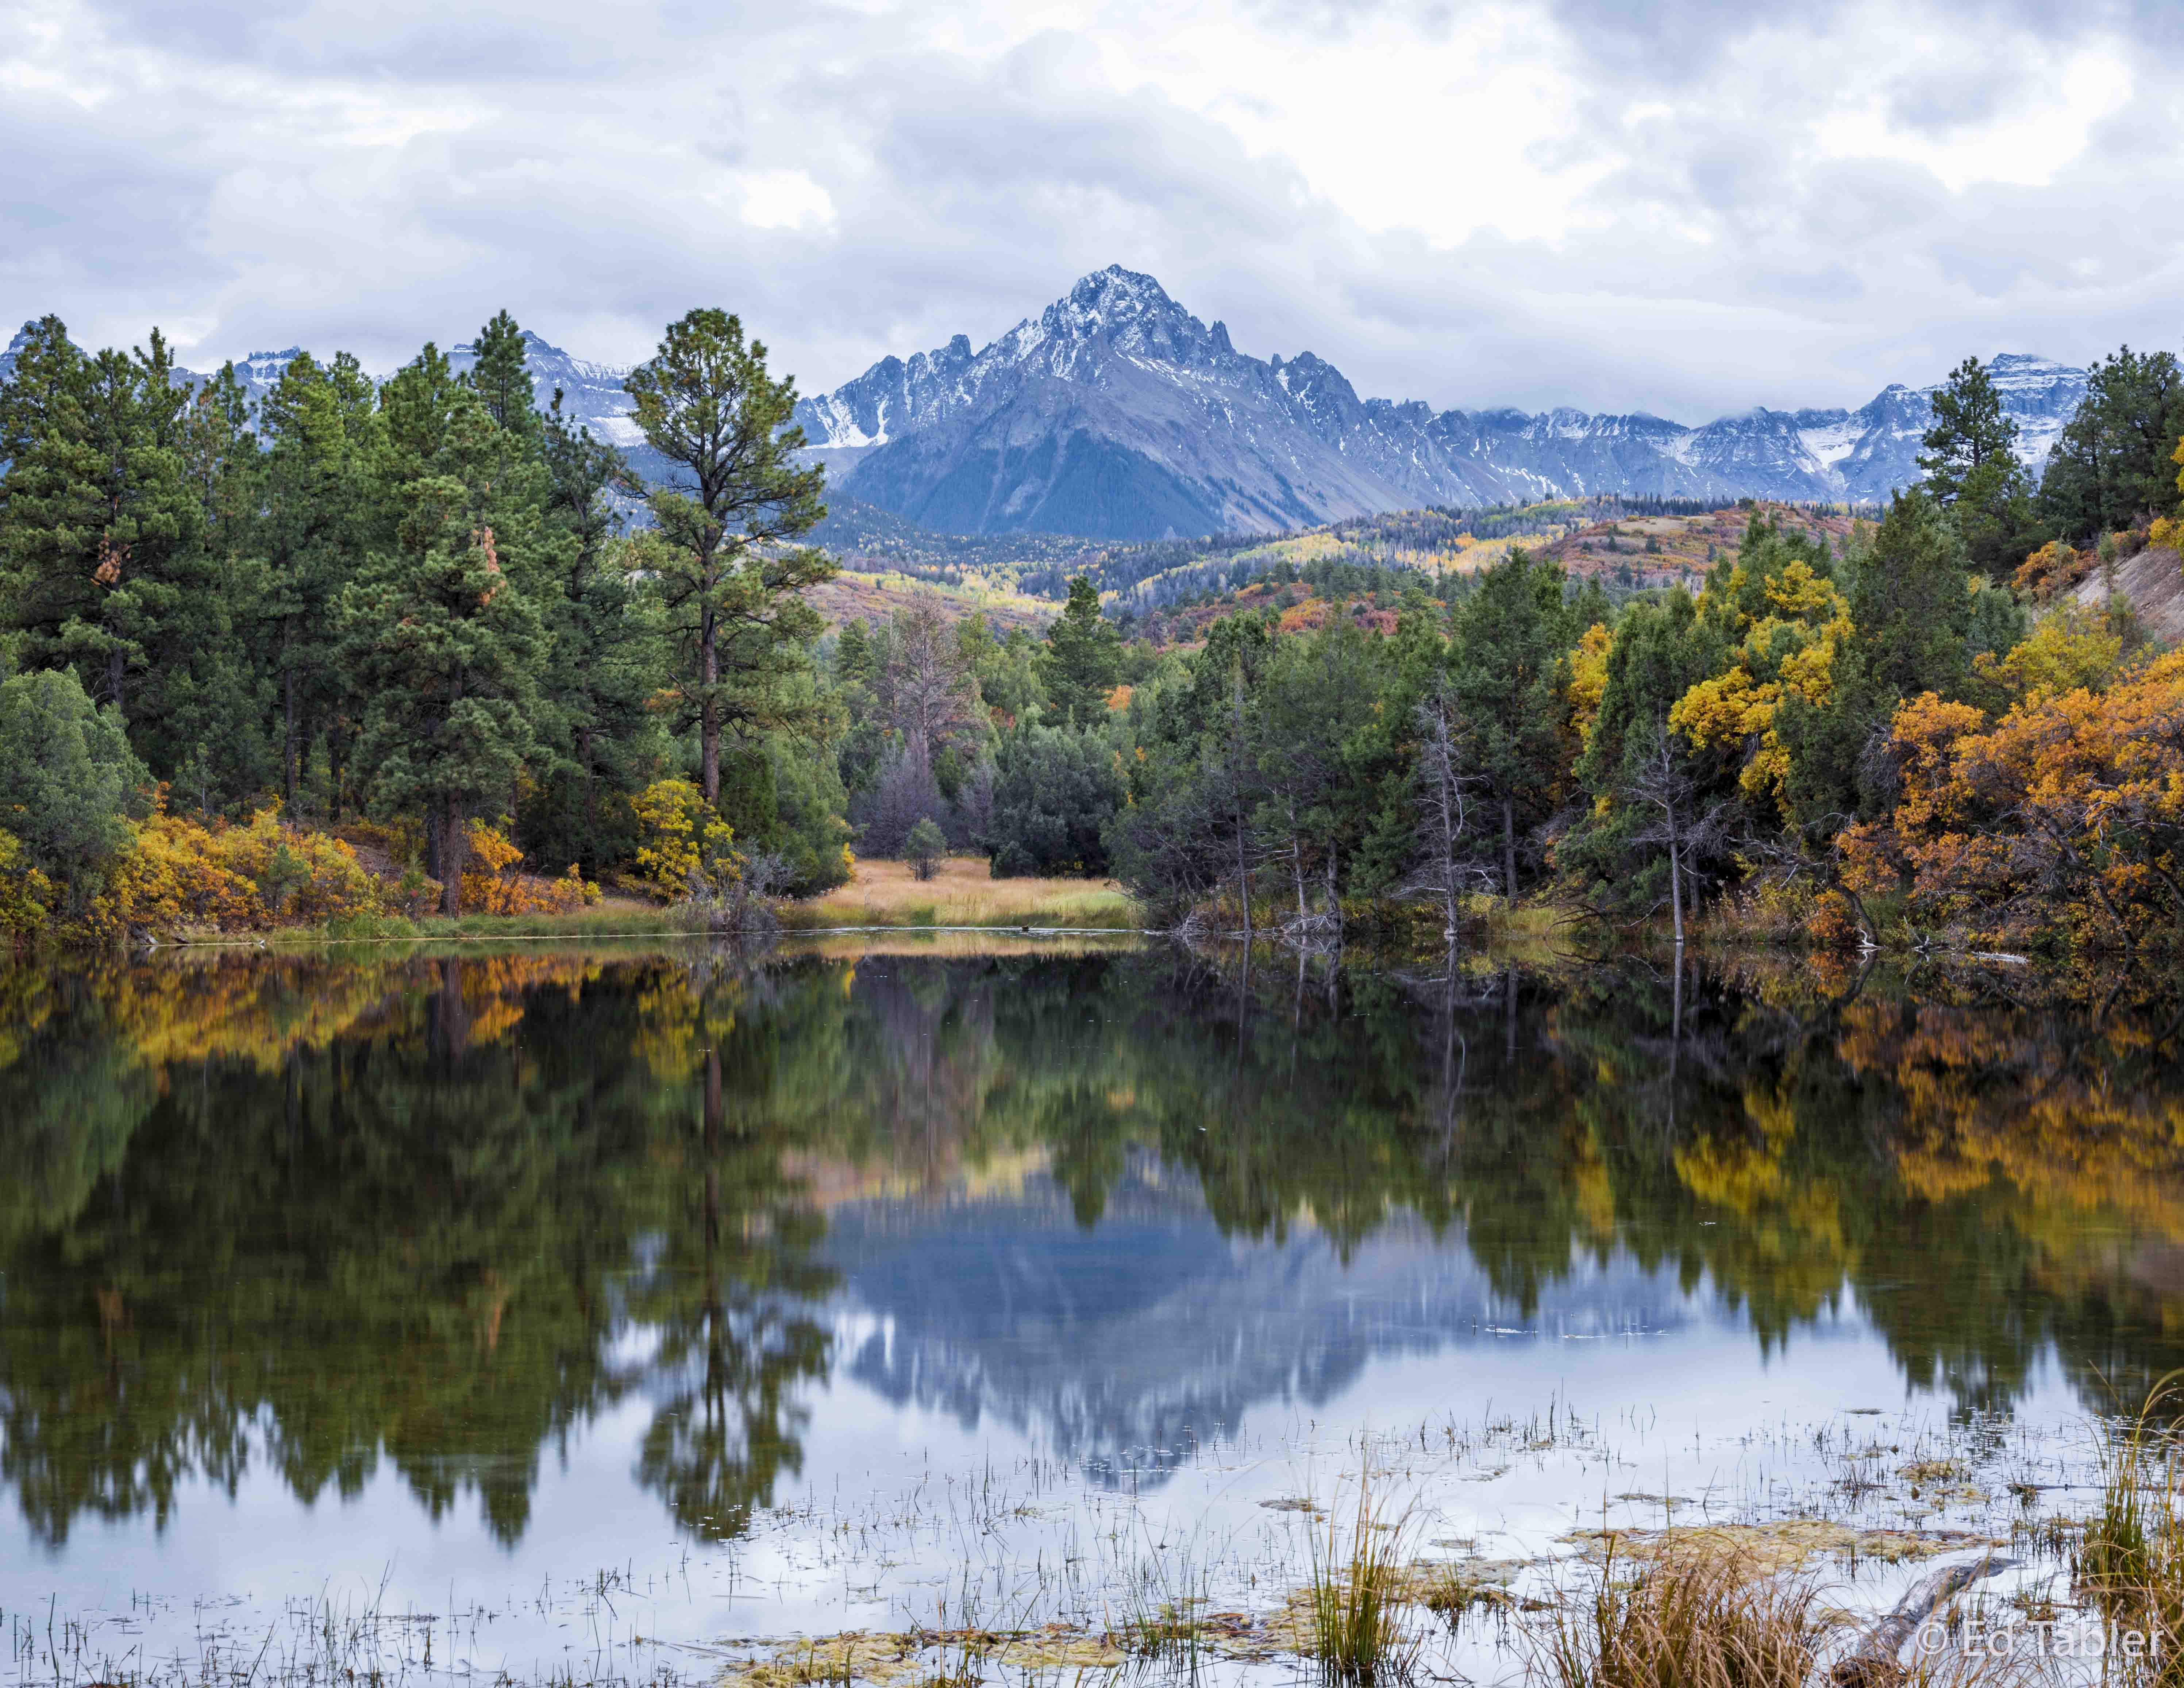 Captured this intimate reflection of&nbsp;Mount Sneffels in a pond&nbsp;framed by the rich colors and textures of a cloudy&nbsp...